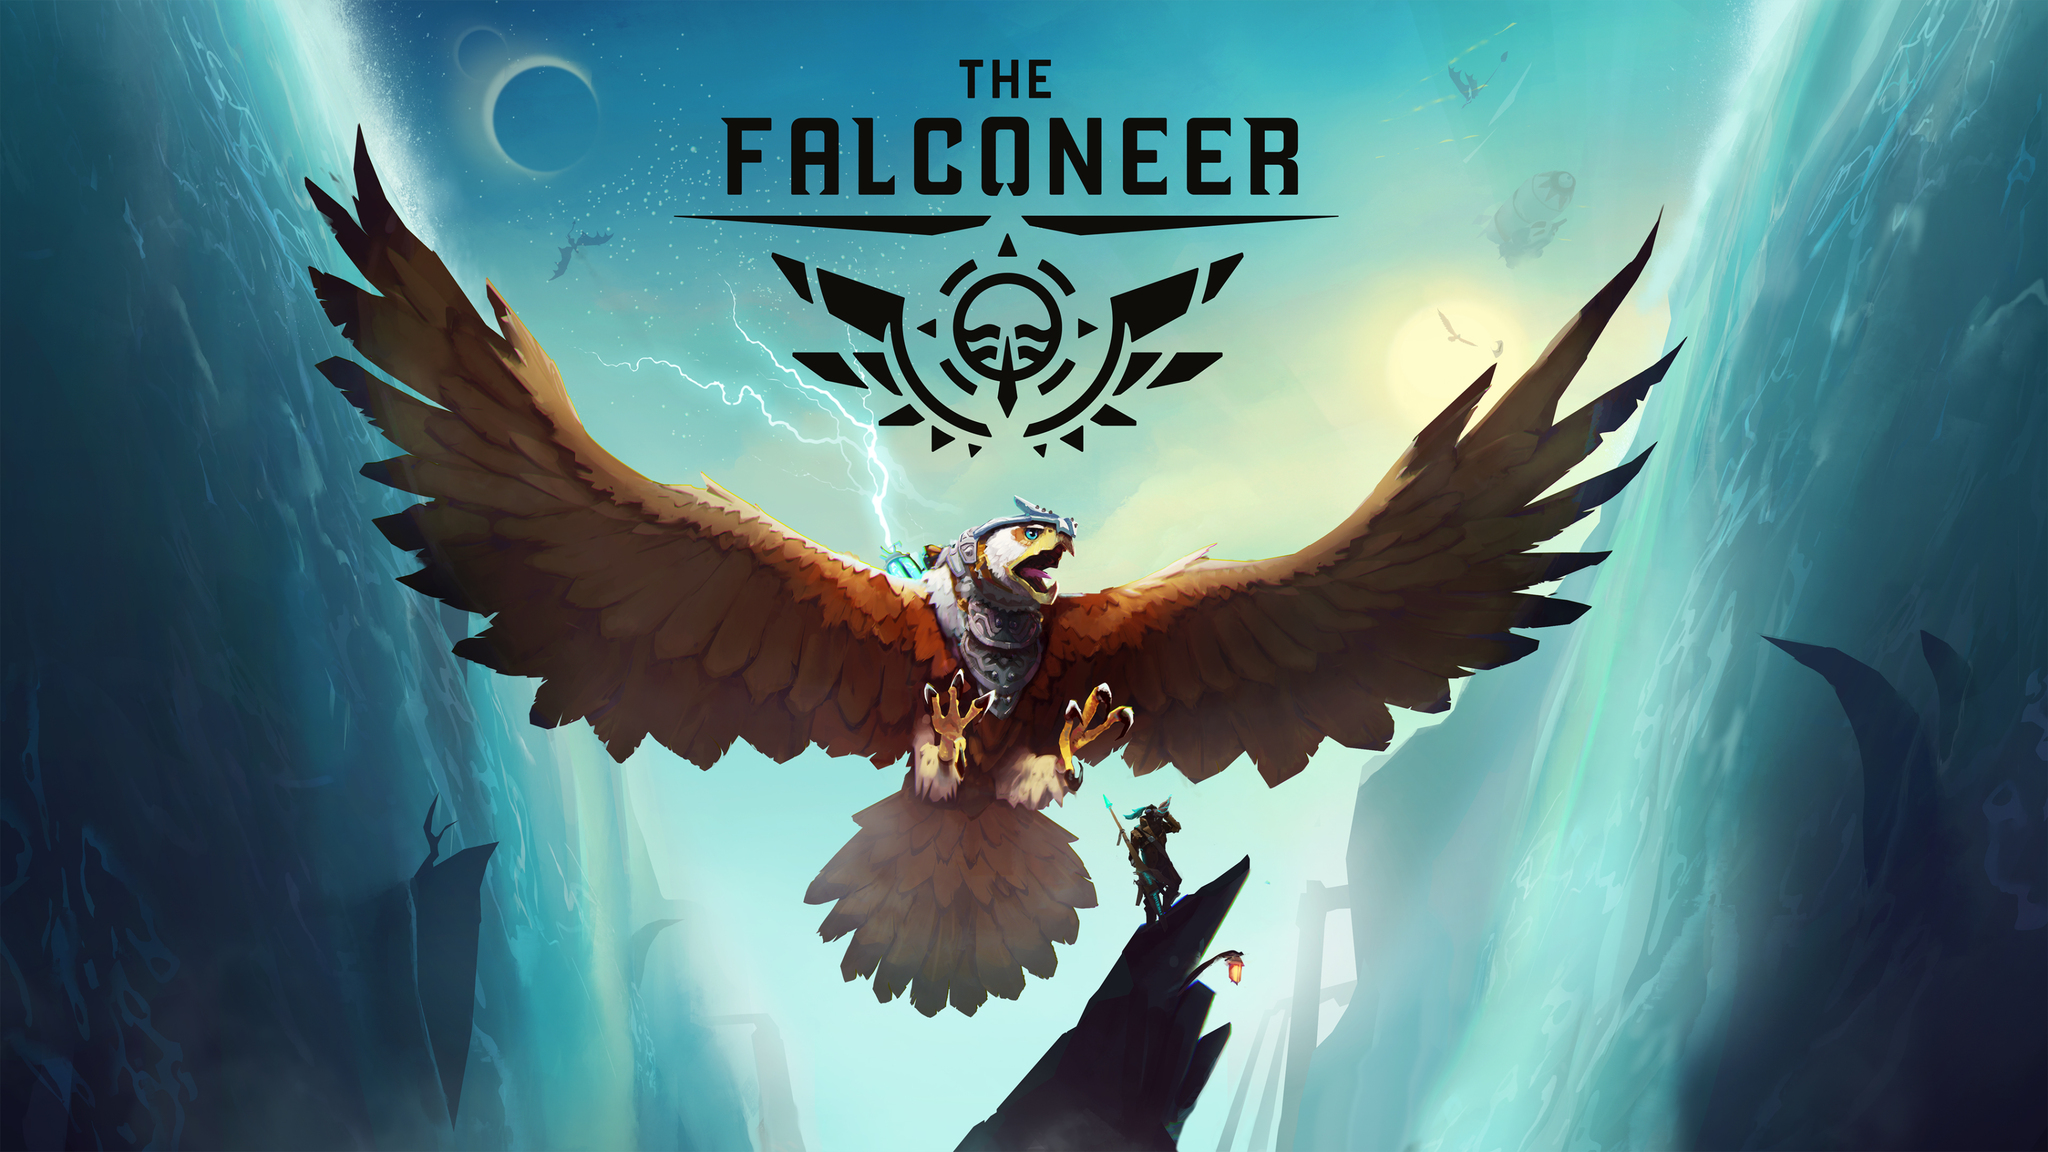 Falconeer_splash The Falconeer - How Can You Fight When There Are So Many Sights to See?